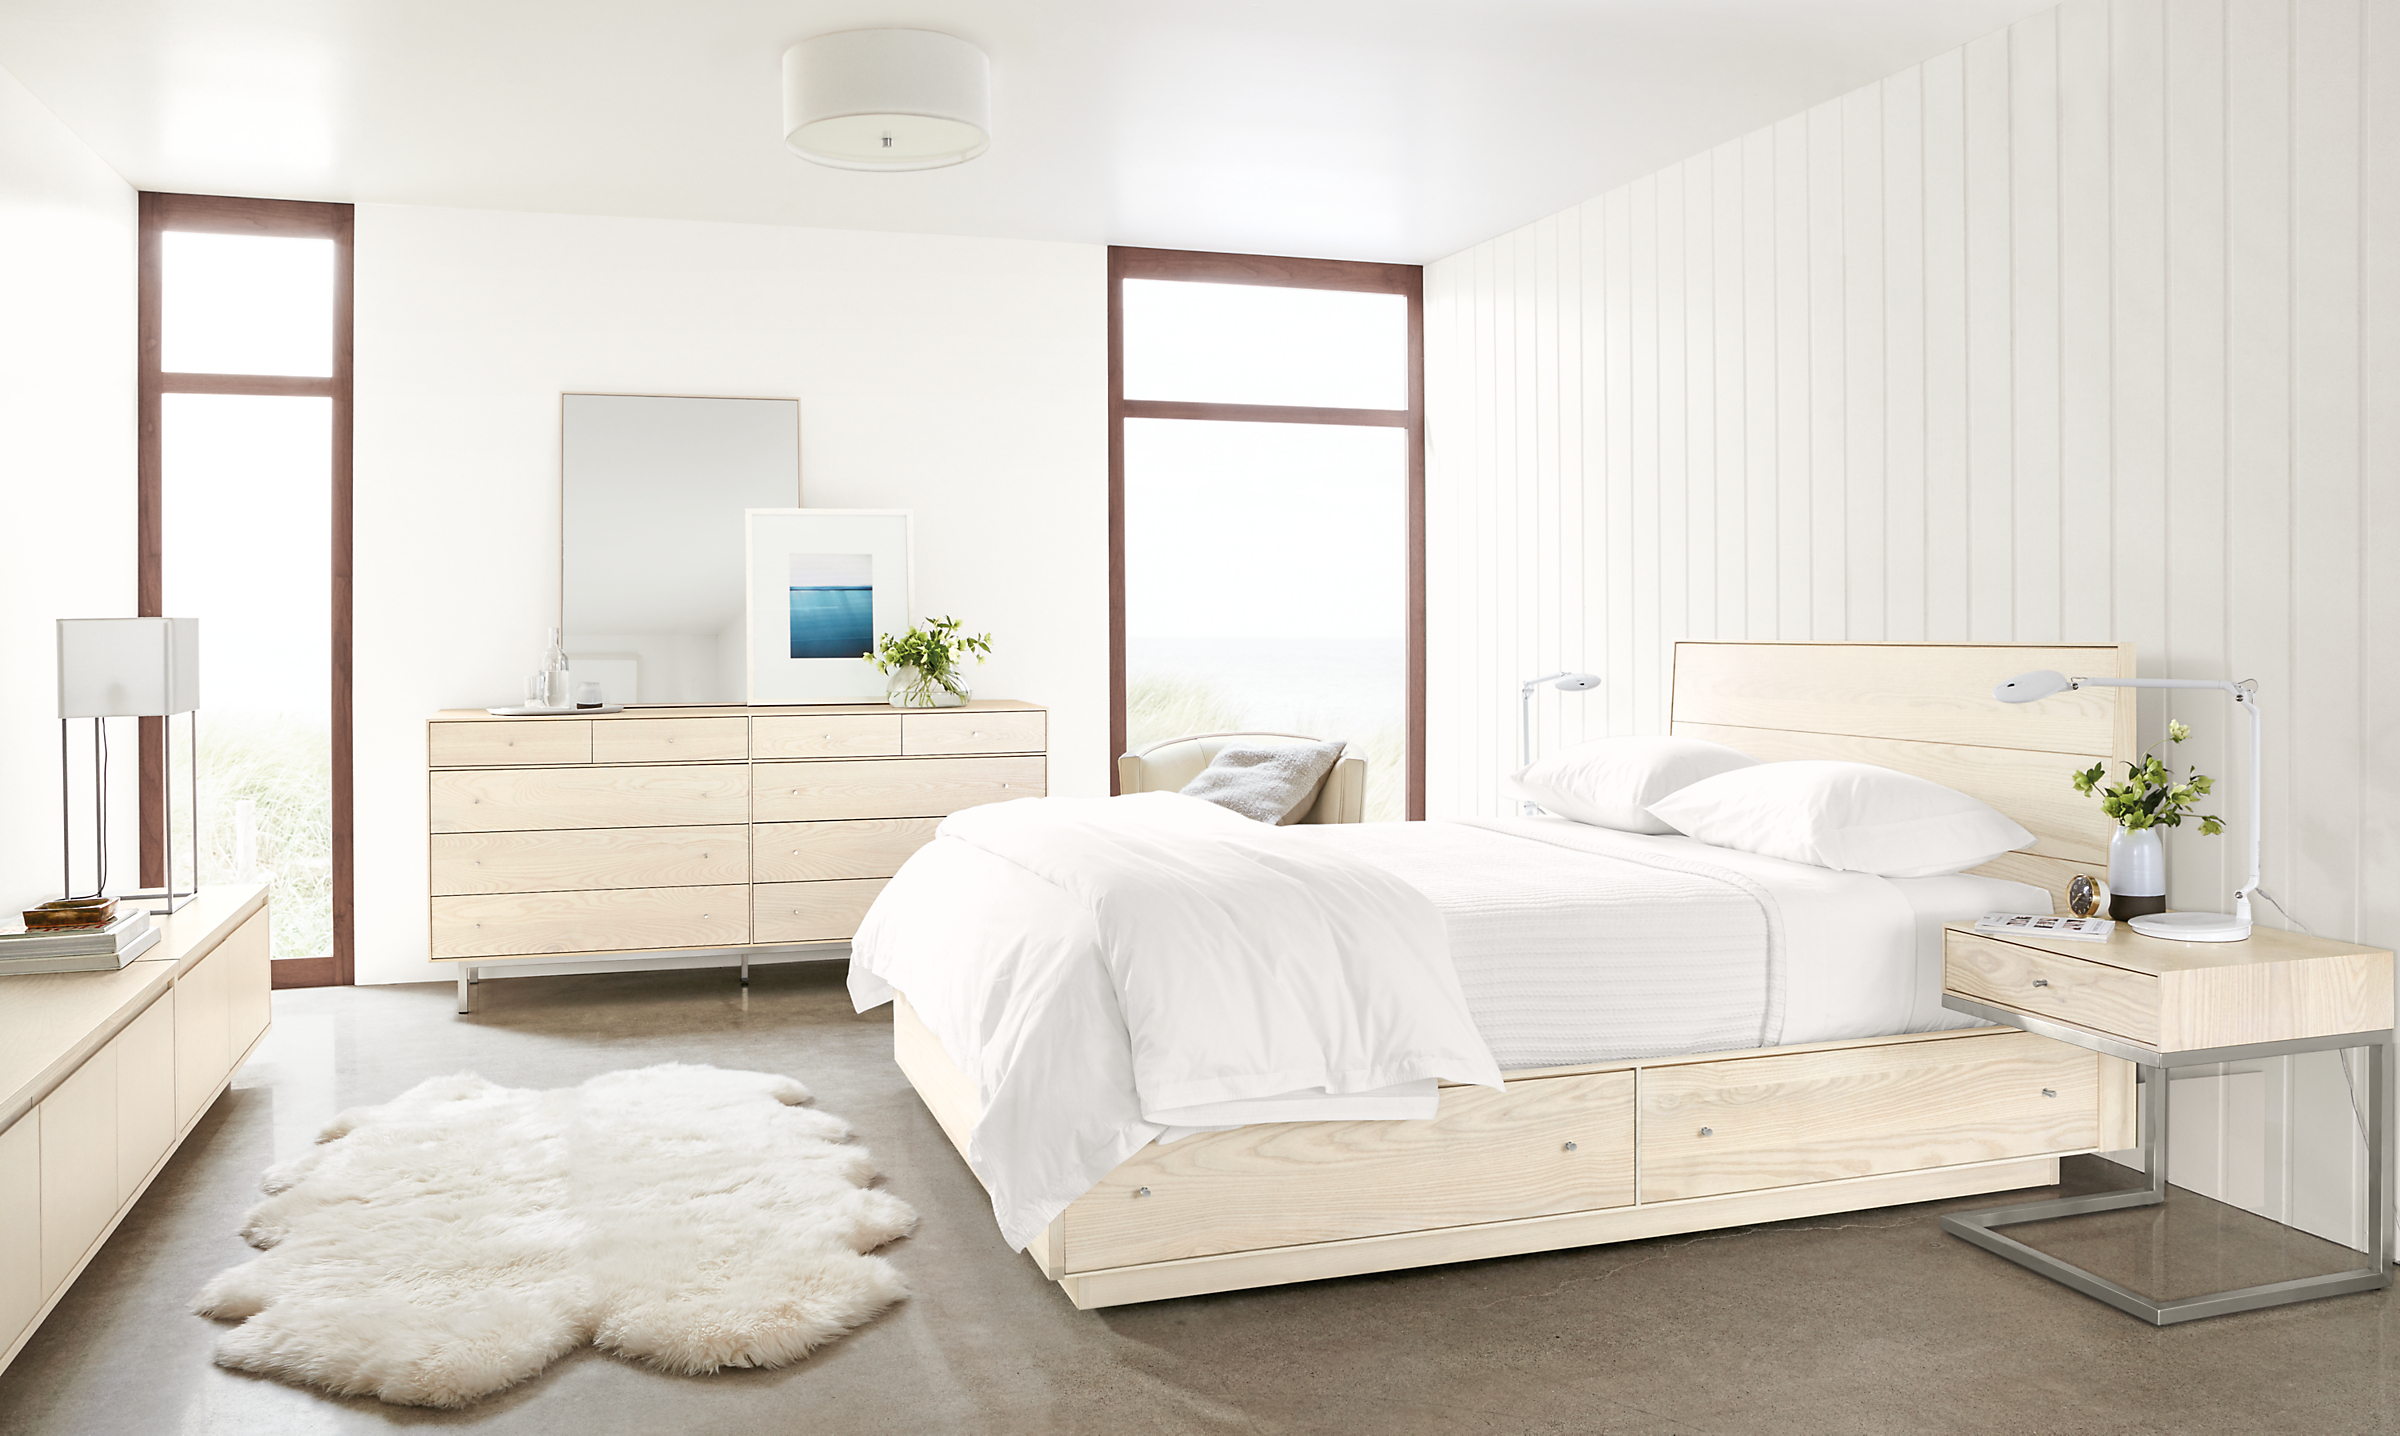 Hudson bedroom collection in sand stain.